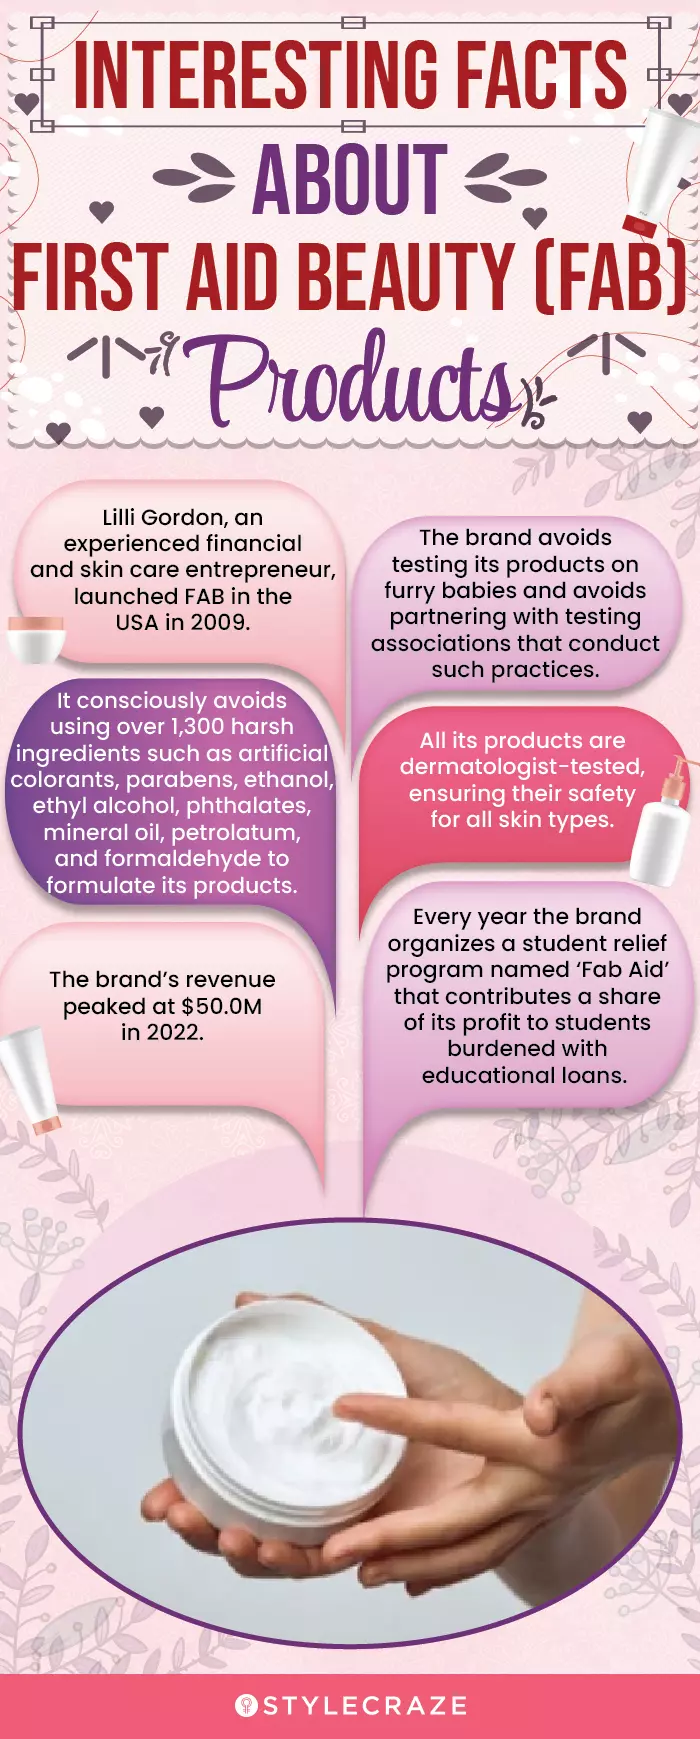  Interesting Facts About First Aid Beauty (FAB) Products (infographic)